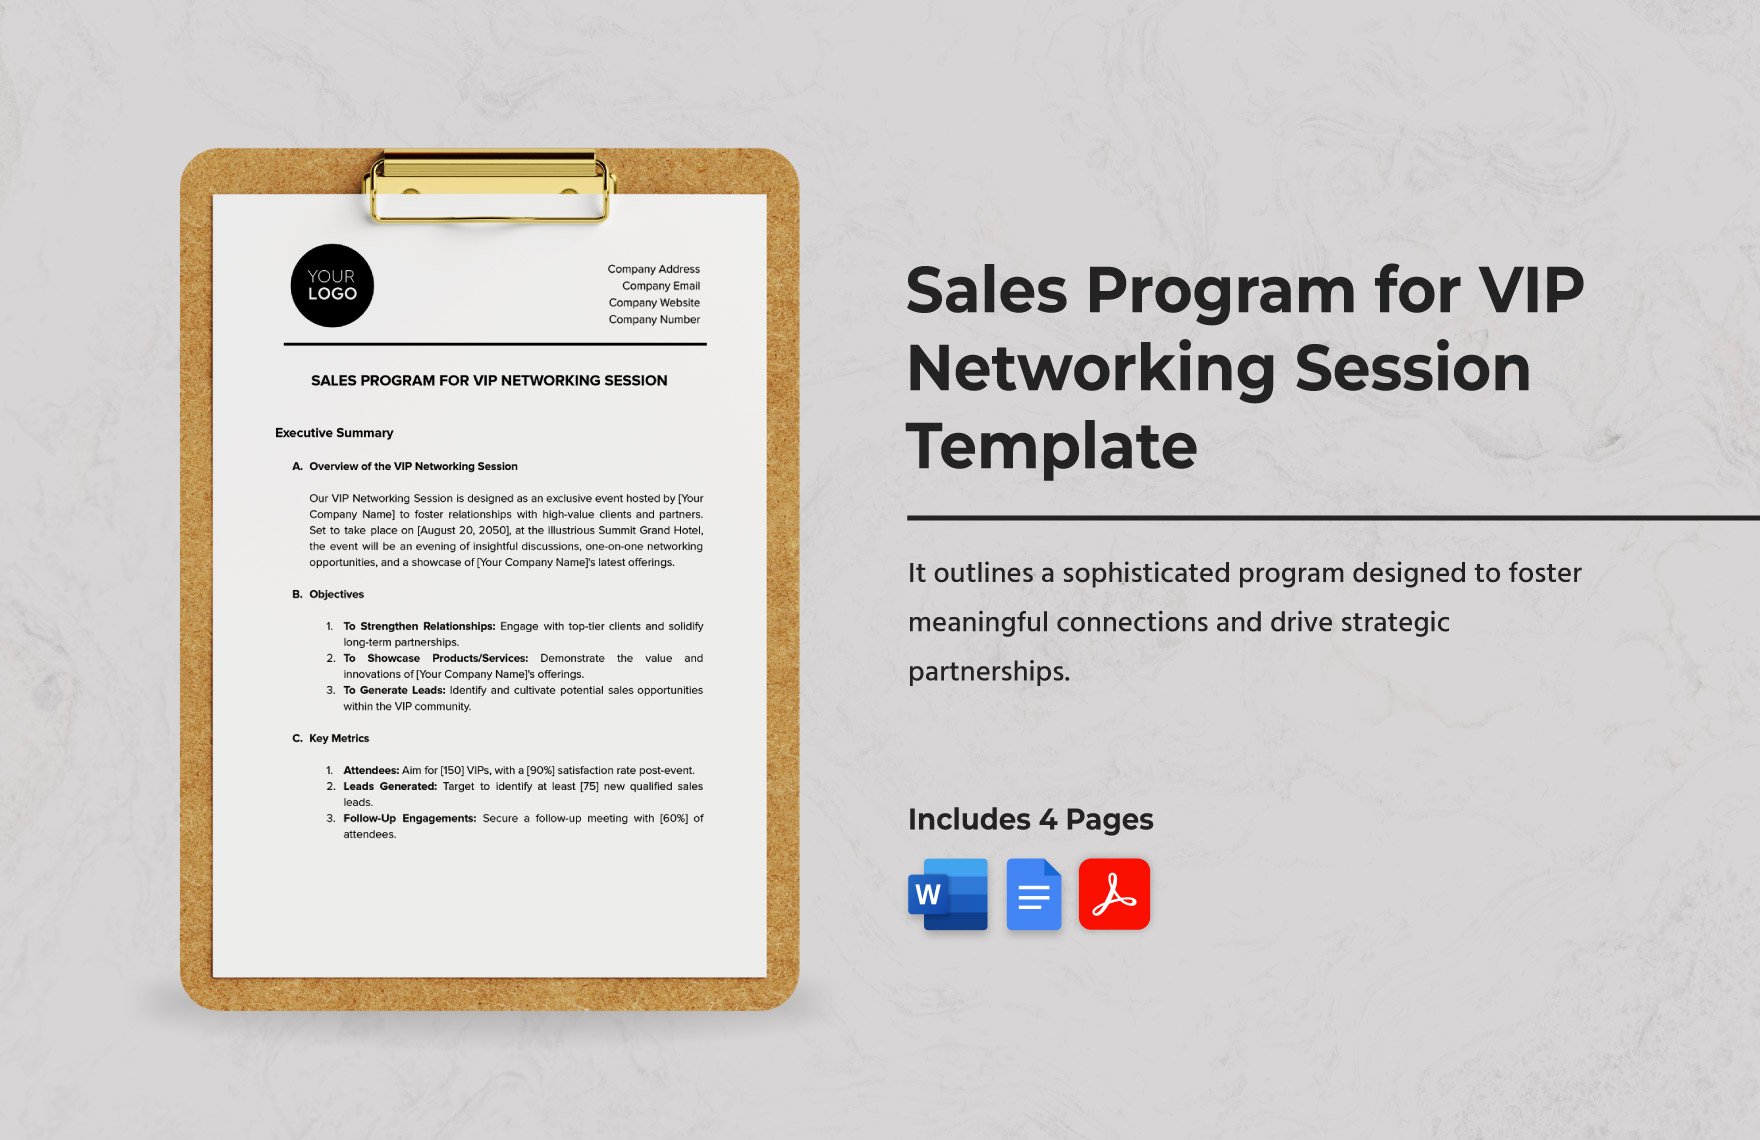 Sales Program for VIP Networking Session Template